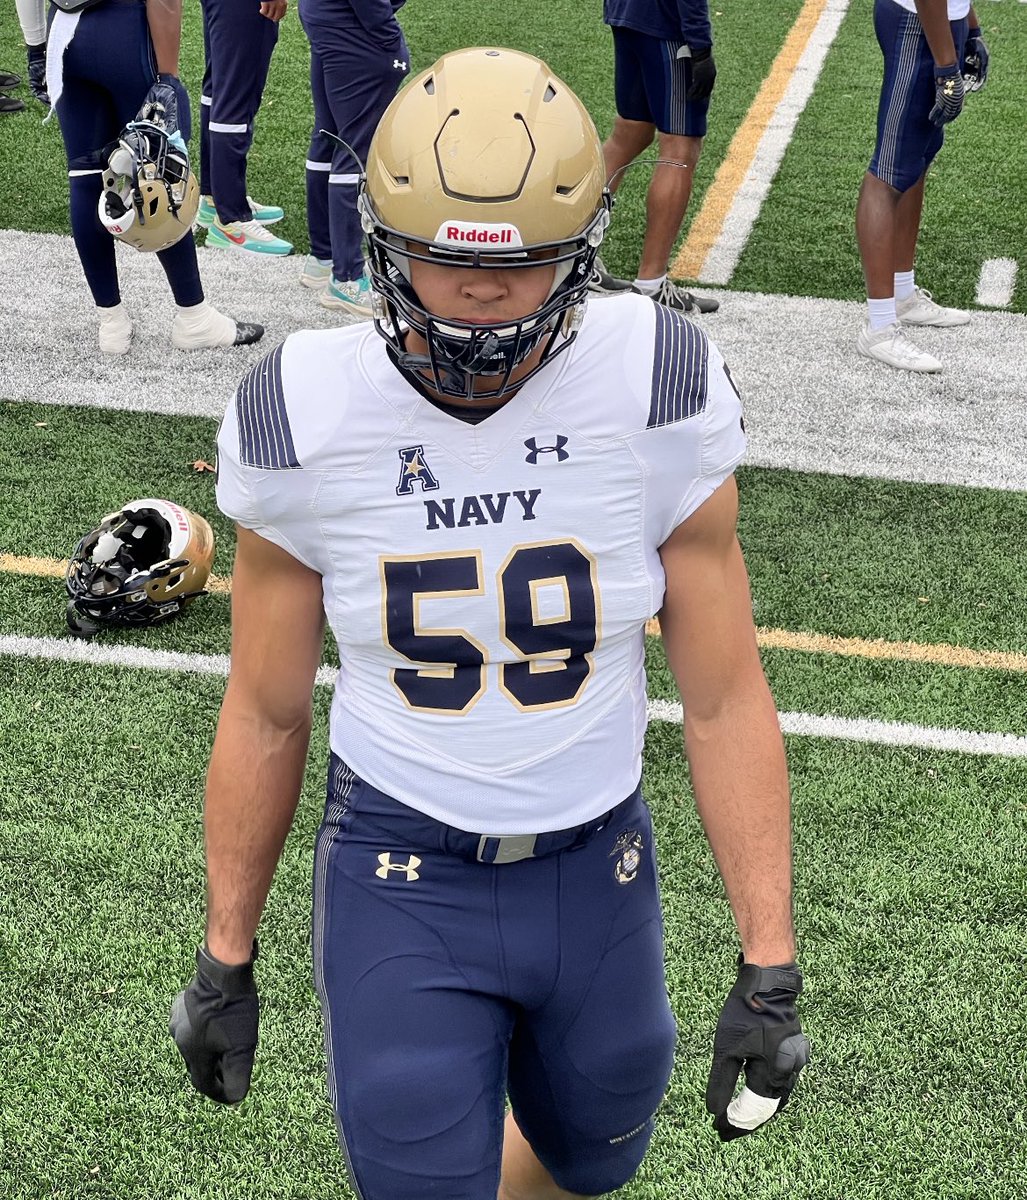 Good luck to former 🐻 @SackSimmons this spring @NavyFB 🇺🇸We’re proud of you!! 🐻💪 @BashaAthletics @MarquesReischl